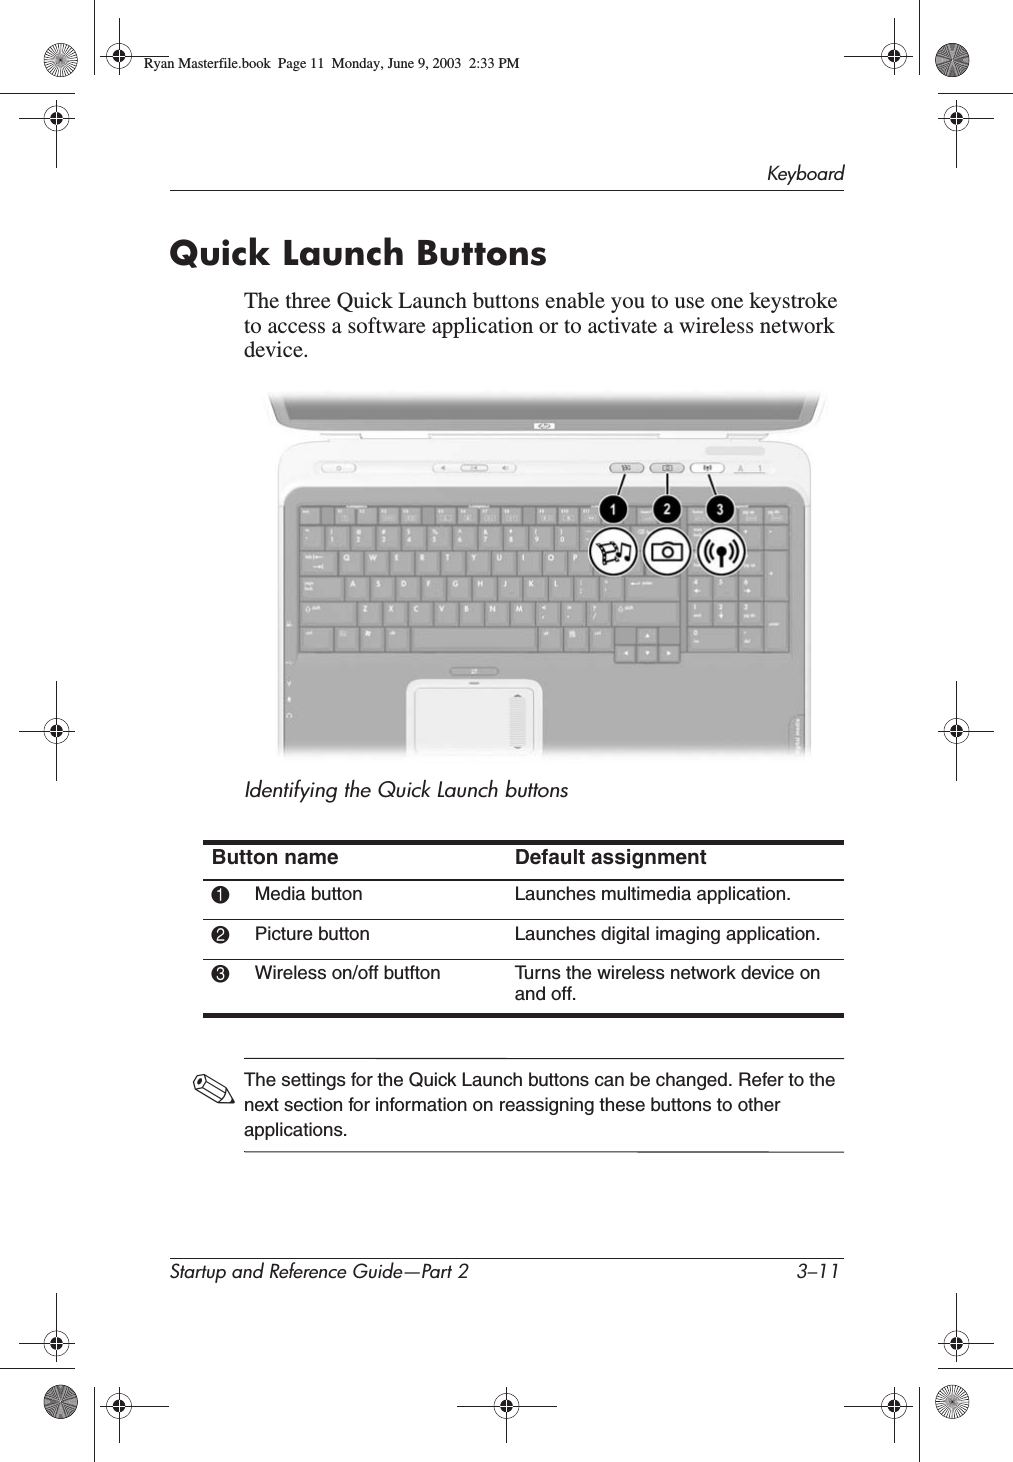 KeyboardStartup and Reference Guide—Part 2 3–11Quick Launch ButtonsThe three Quick Launch buttons enable you to use one keystroke to access a software application or to activate a wireless network device.Identifying the Quick Launch buttons✎The settings for the Quick Launch buttons can be changed. Refer to the next section for information on reassigning these buttons to other applications.Button name Default assignment1Media button Launches multimedia application.2Picture button Launches digital imaging application.3Wireless on/off butfton Turns the wireless network device on and off.Ryan Masterfile.book  Page 11  Monday, June 9, 2003  2:33 PM